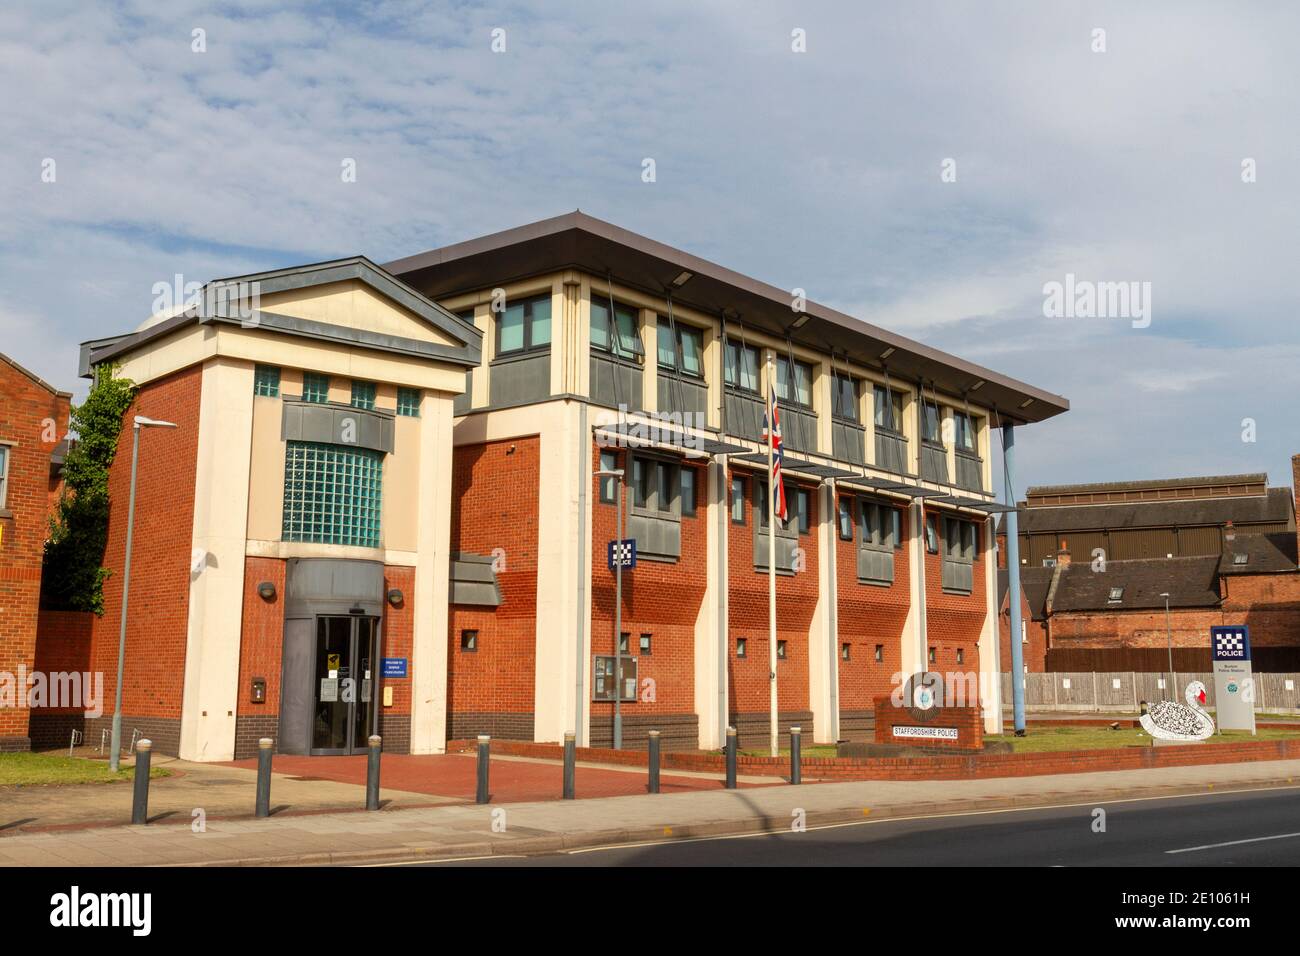 Burton Police Station, Staffordshire Police, Burton upon Trent, (Burton-on-Trent or Burton), a market town in Staffordshire, UK. Stock Photo